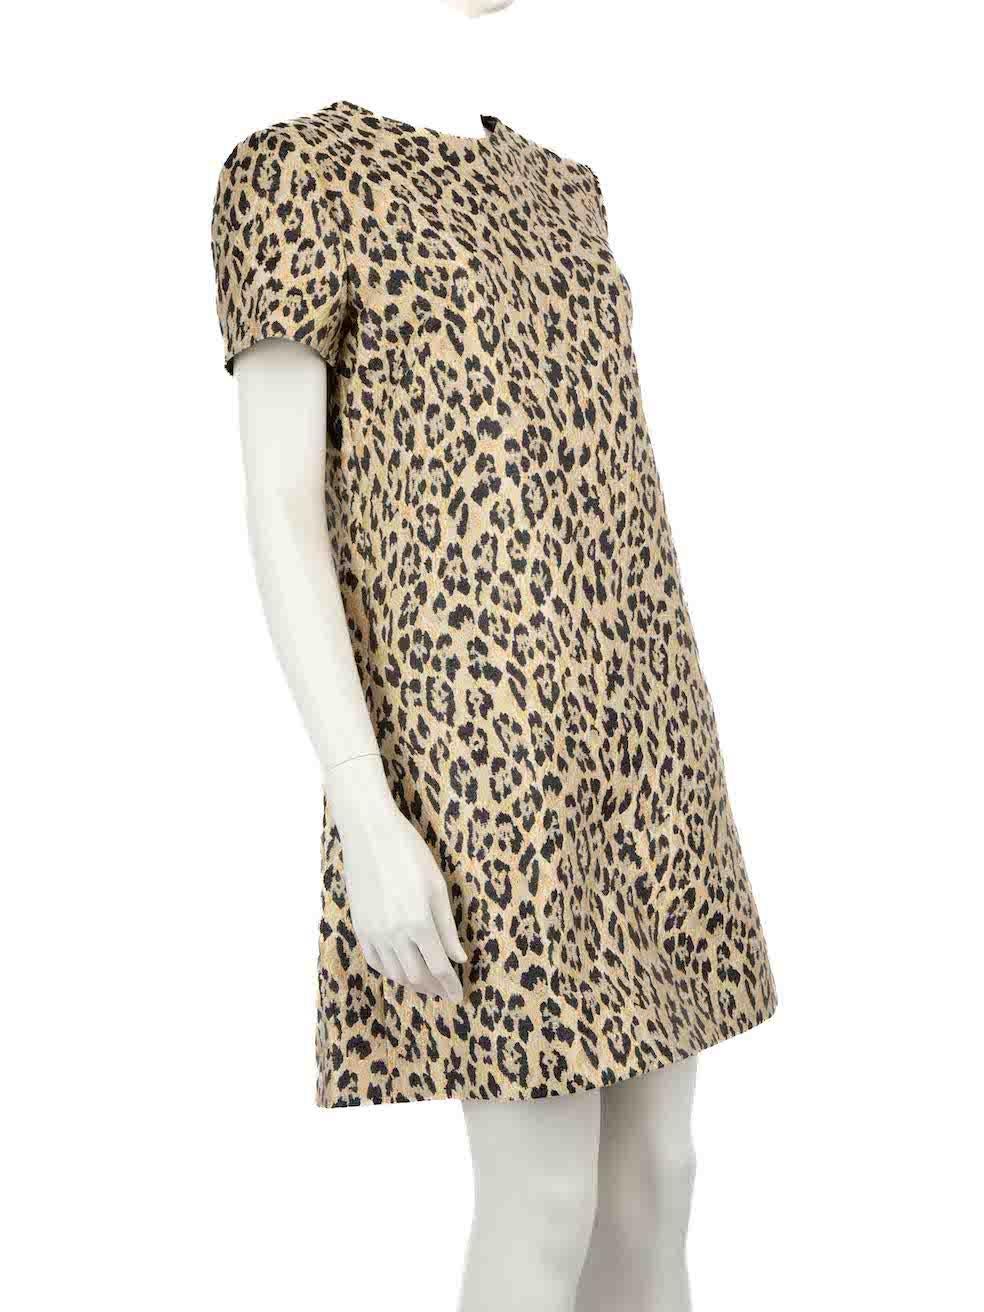 CONDITION is Very good. Hardly any visible wear to dress is evident on this used Valentino designer resale item
 
 
 
 Details
 
 
 Beige
 
 Synthetic
 
 Short sleeves dress
 
 Leopard jacquard pattern
 
 Knee length
 
 Round neckline
 
 Metallic